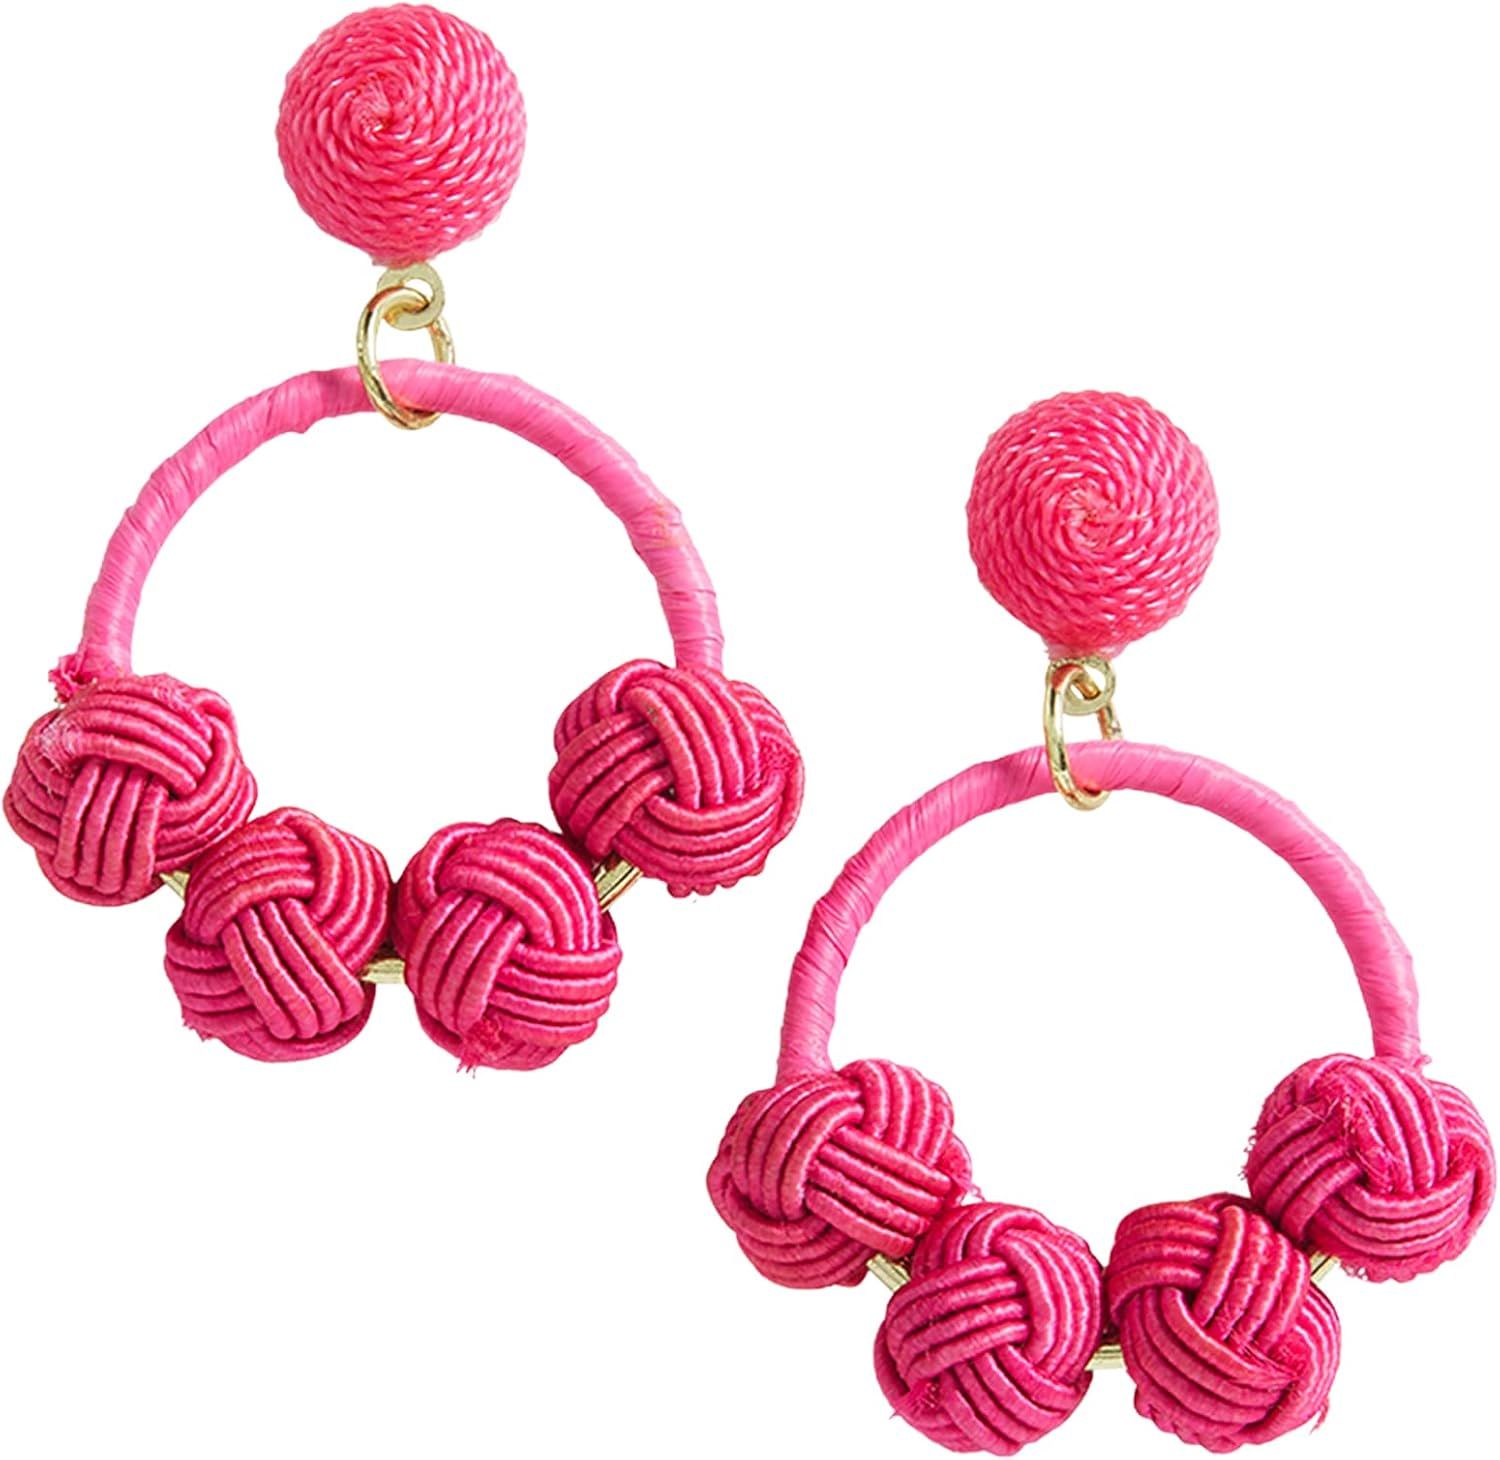 Mud Pie Women's Knotted Hoop Earrings, Pink, One Size | Amazon (US)